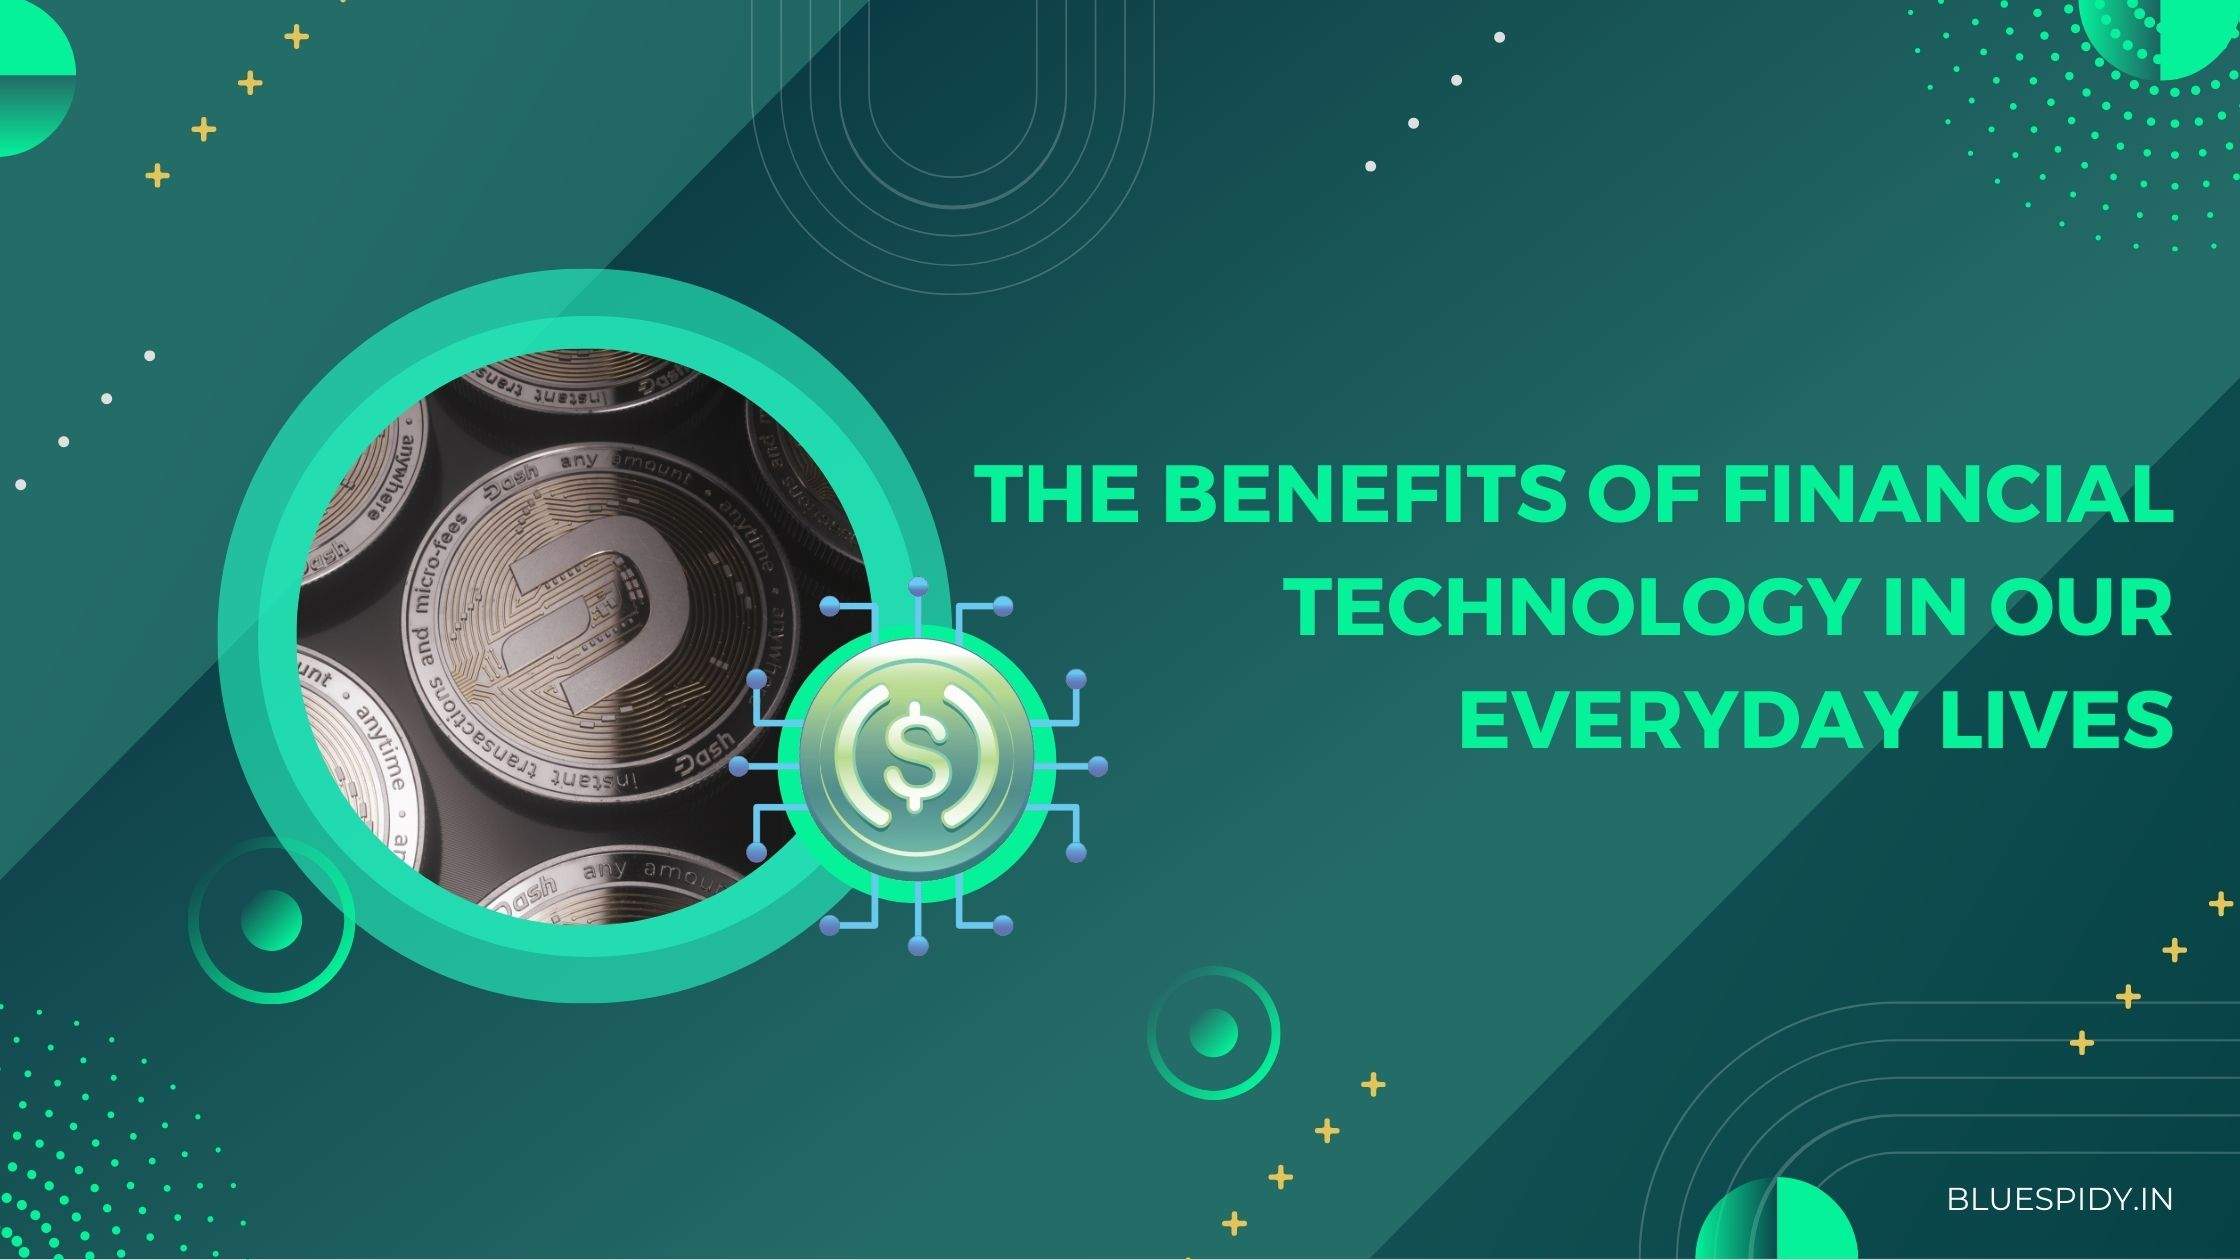 The Benefits of Financial Technology in Our Everyday Lives